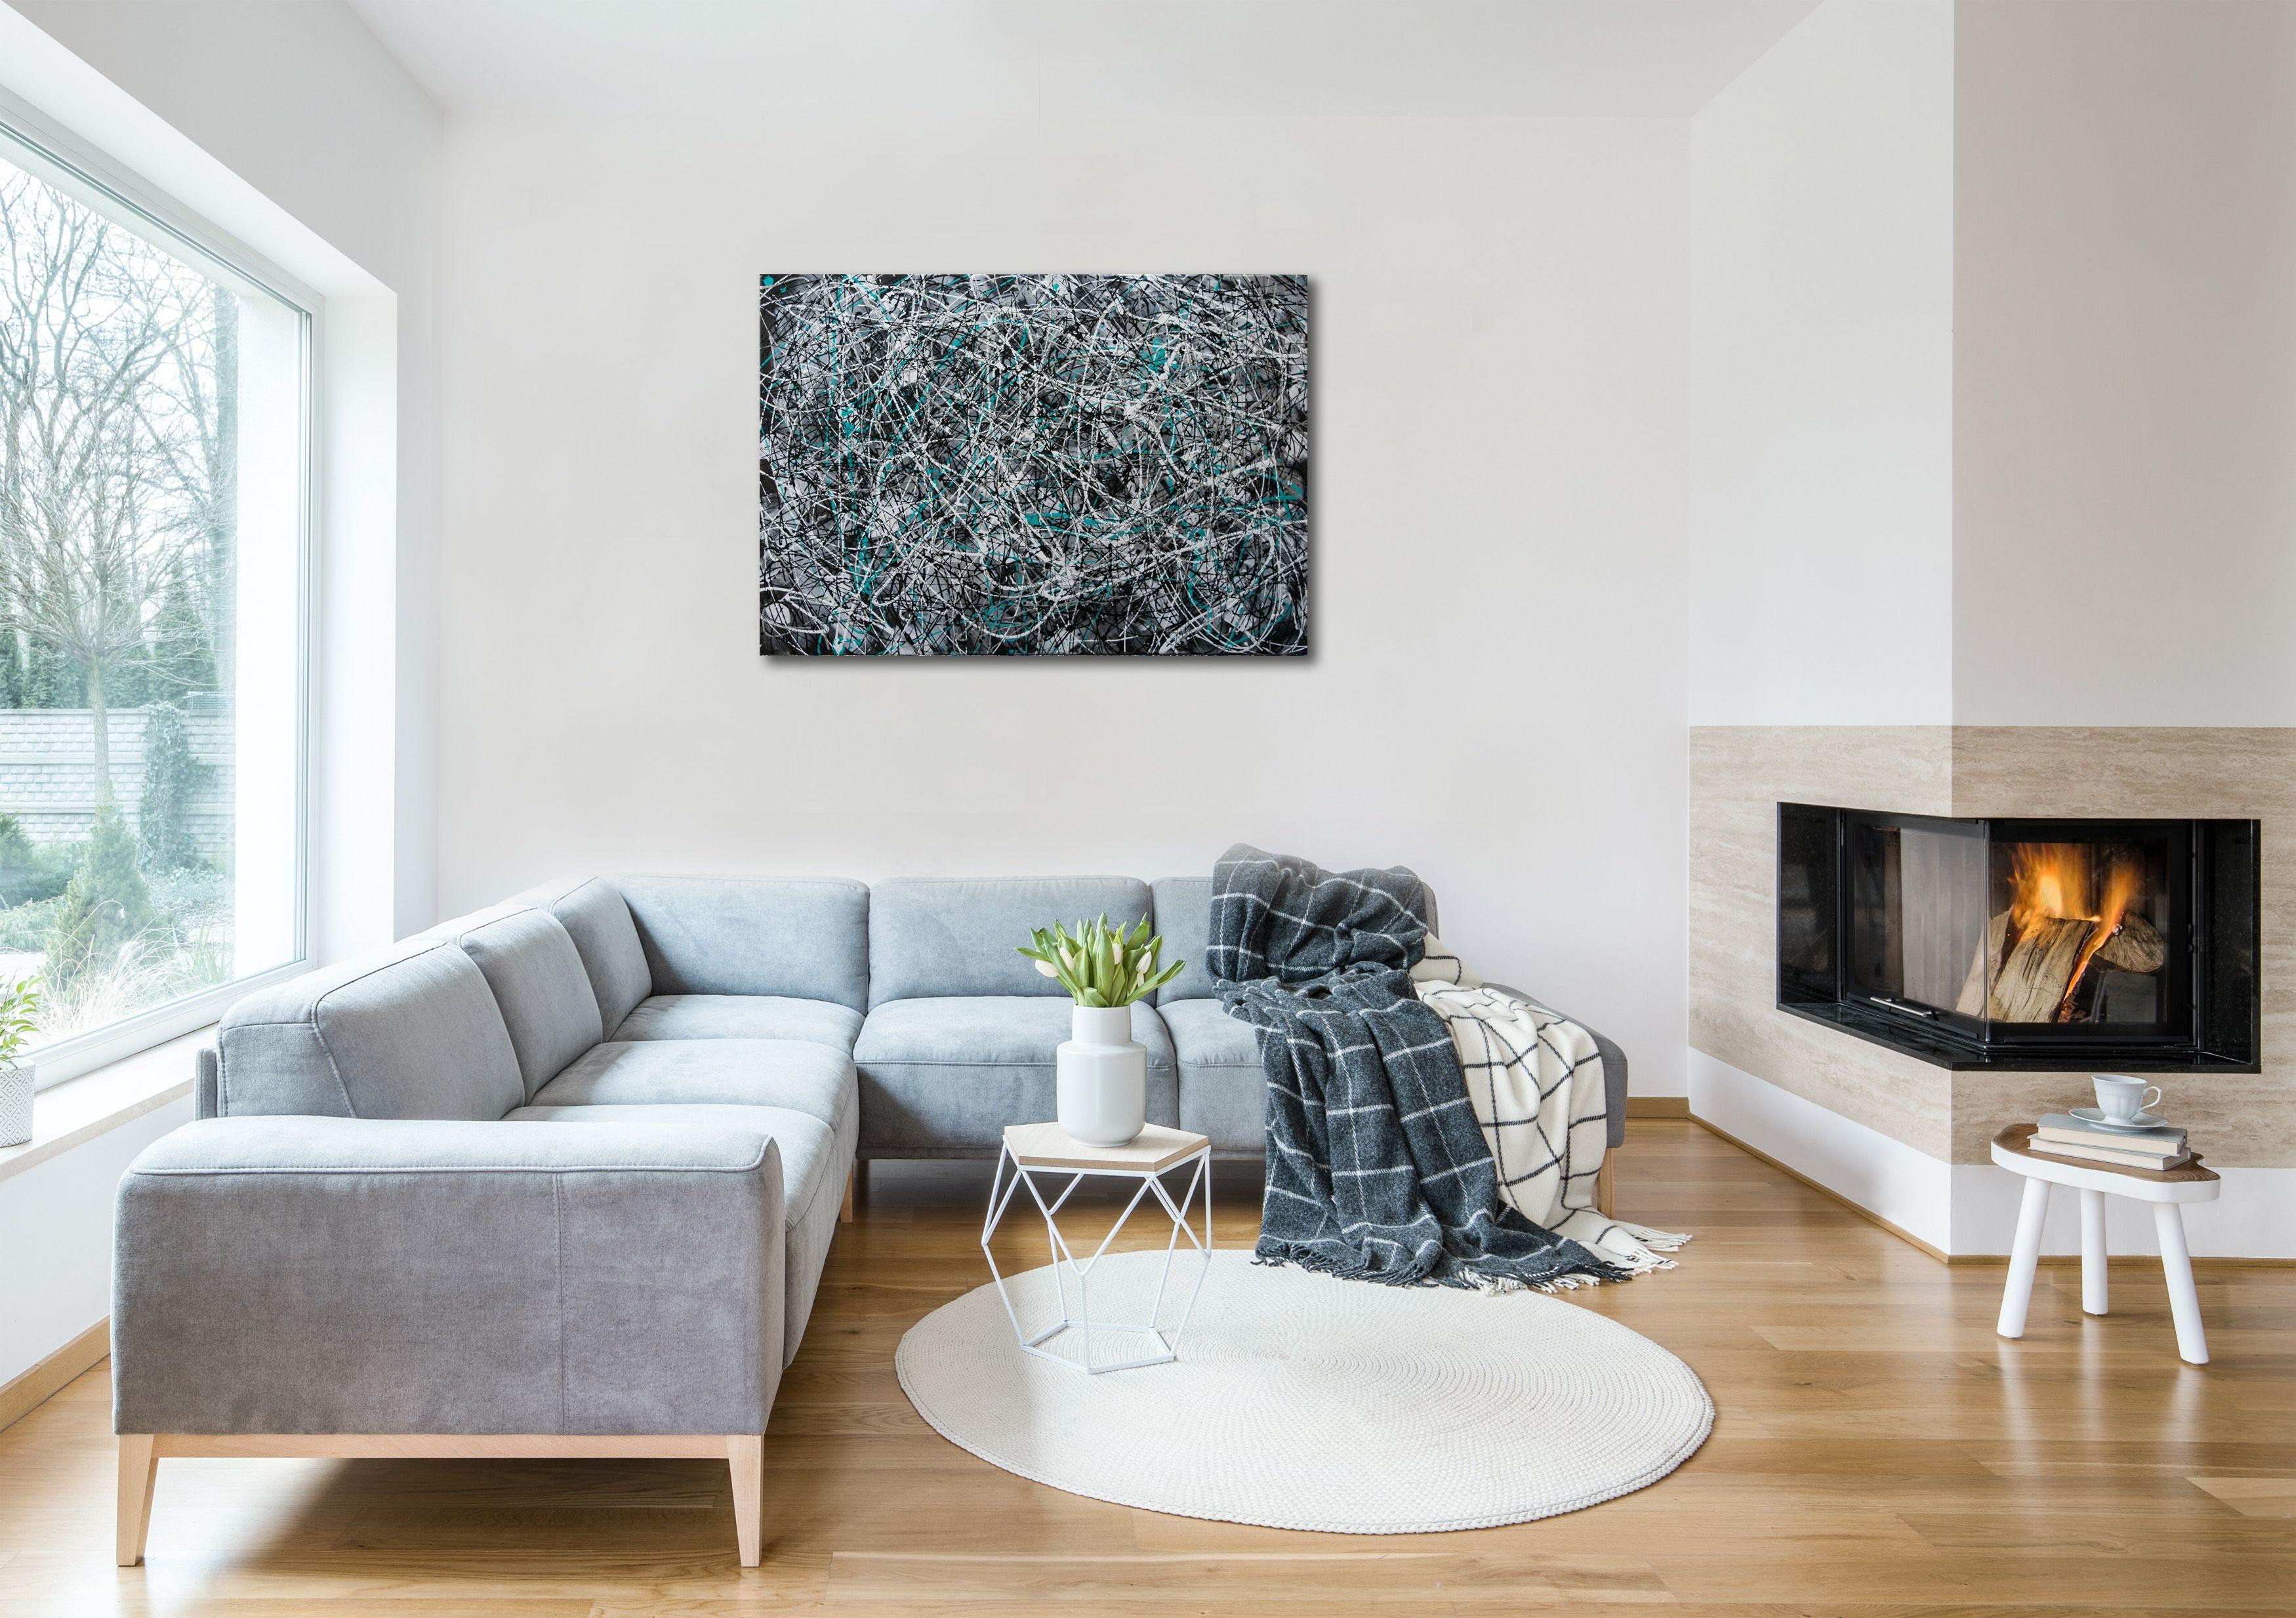 This unique and original painting is made up of layers of colour. It would fit in well with most decorative styles.  A lively colouful abstract painting this piece would be a striking artwork for any room in the house or workplace.   Poured Acrylics